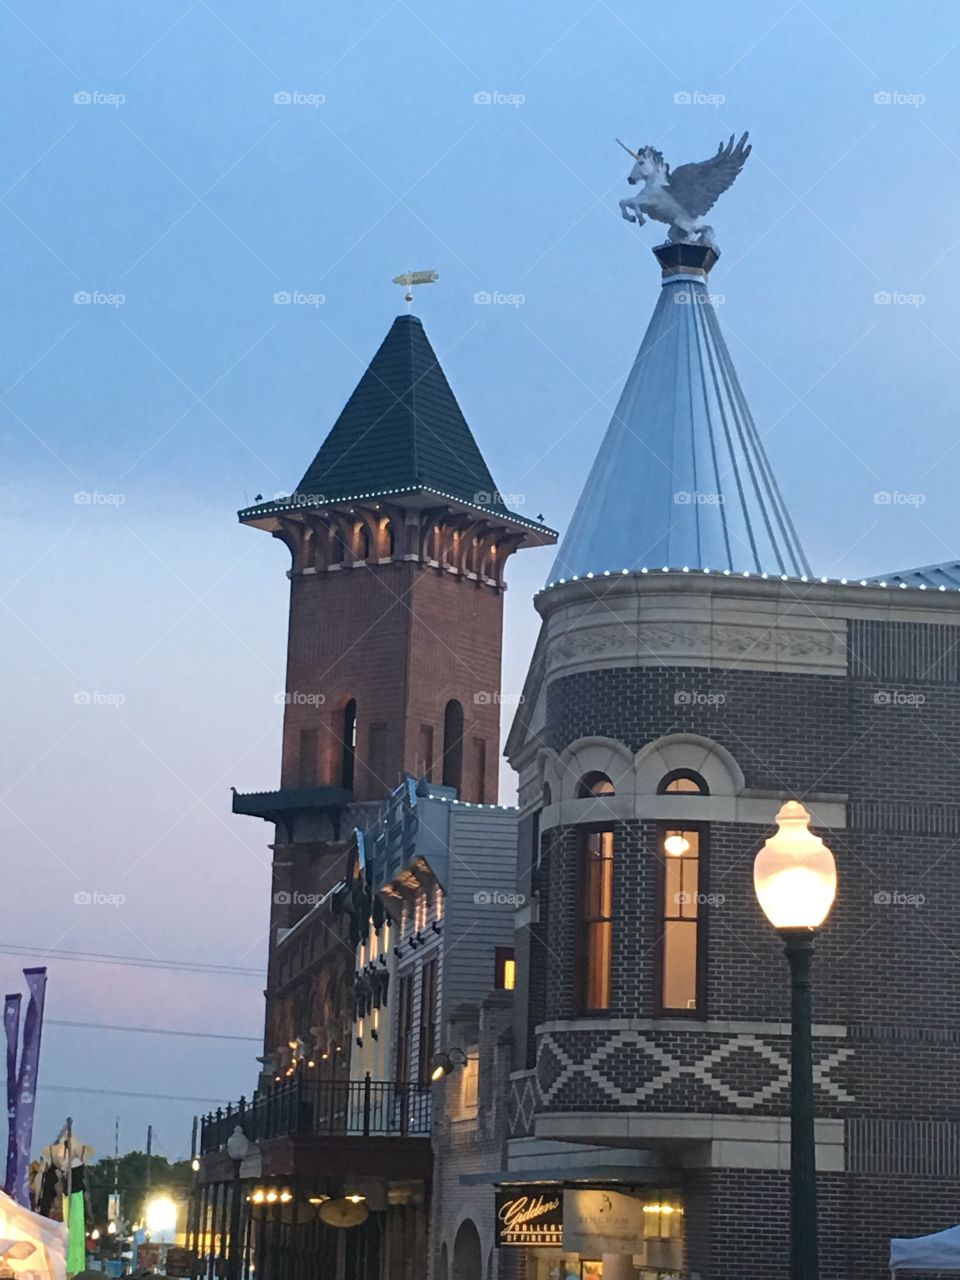 Two towers in historic Grapevine, Texas